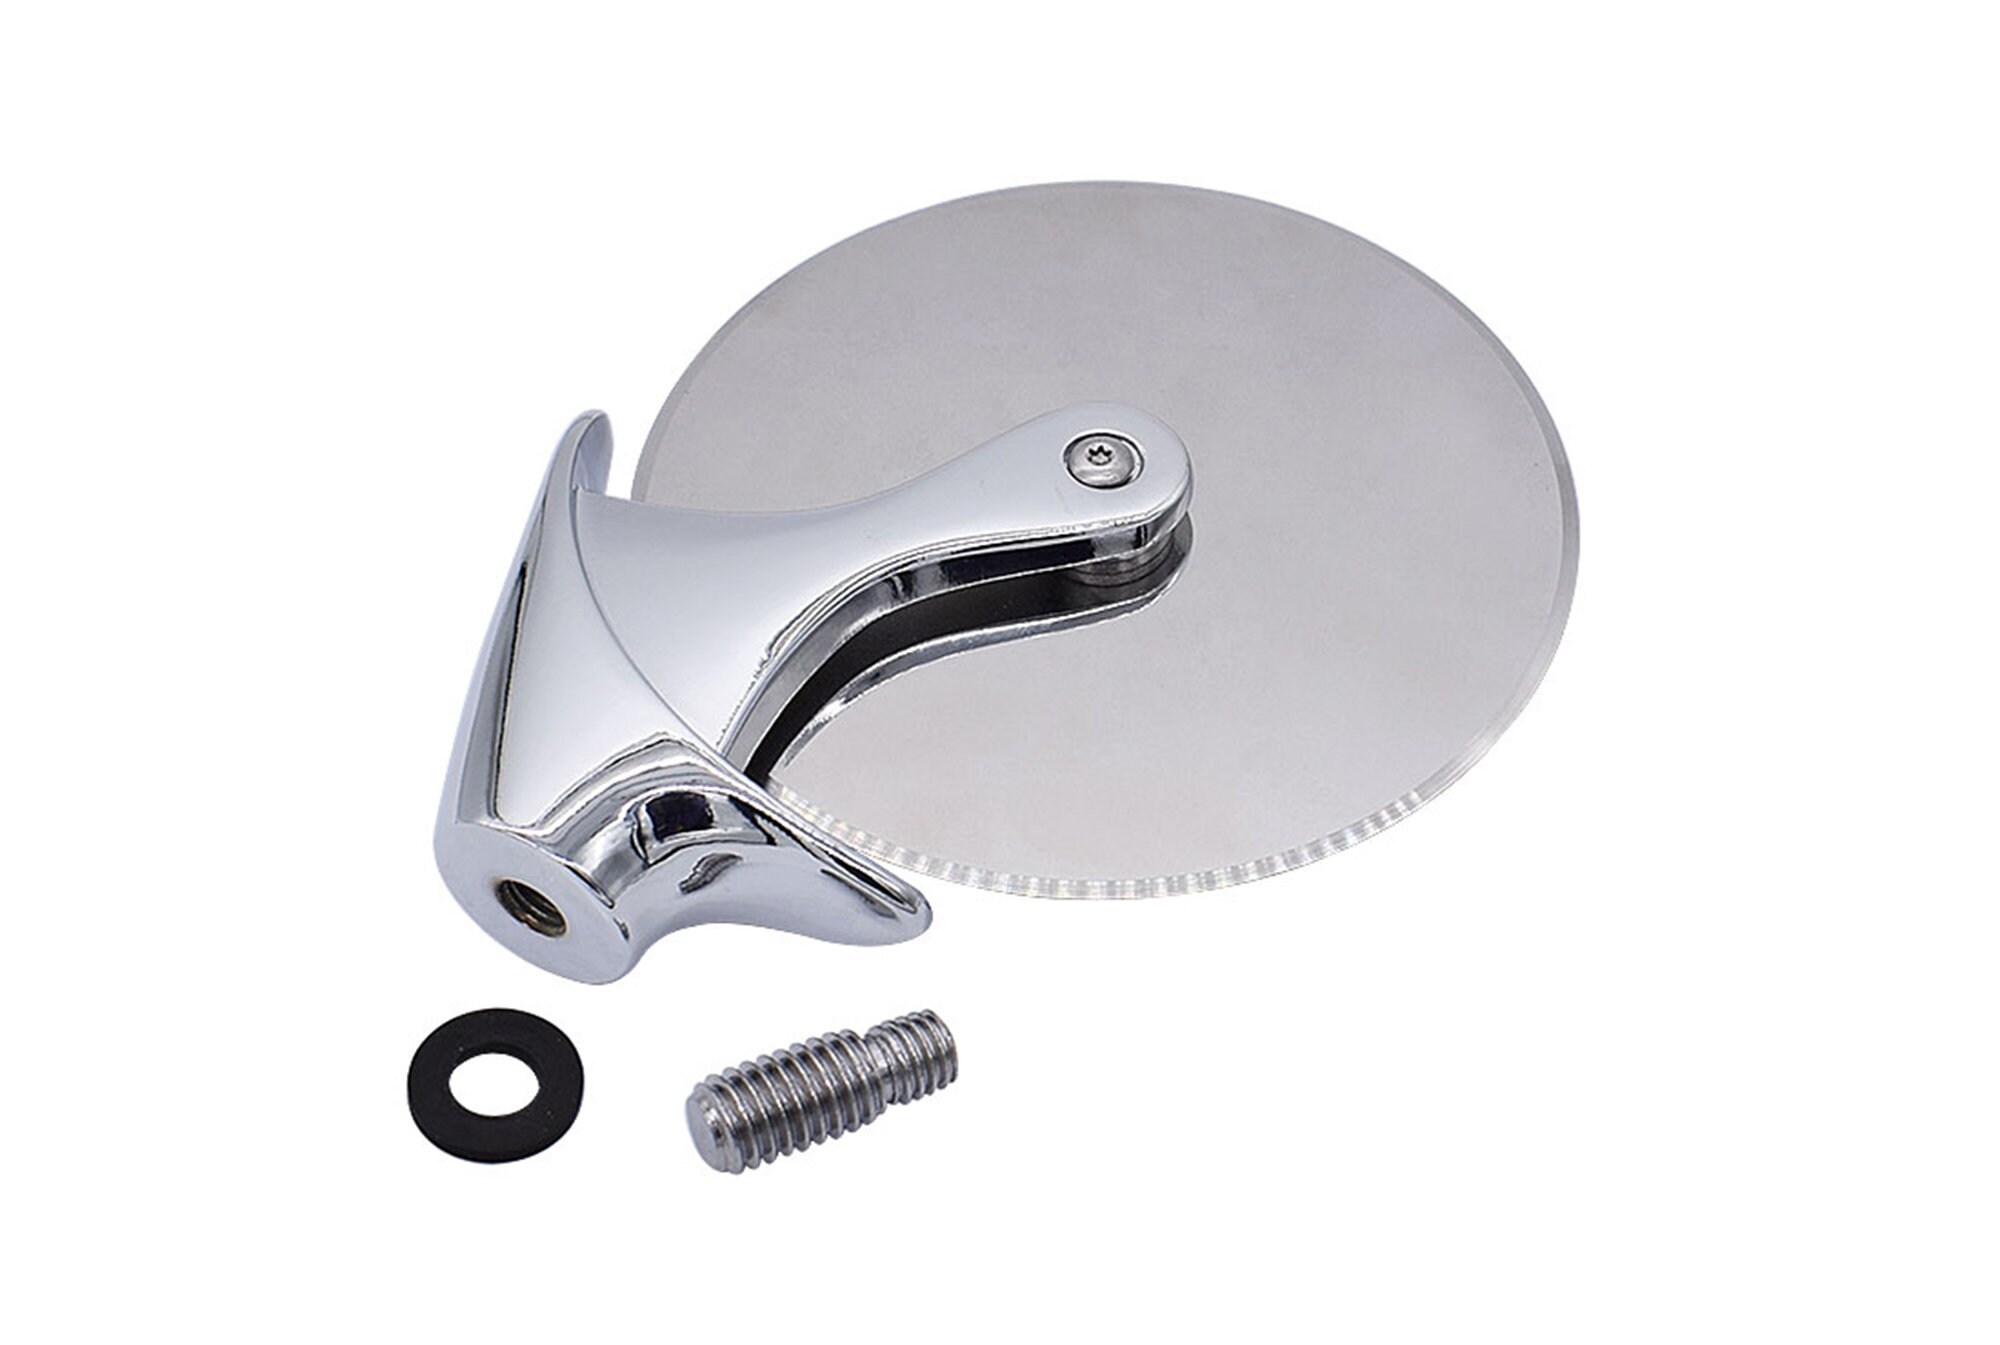 4 Stainless Steel Pizza Cutter Turning Kit - Chrome